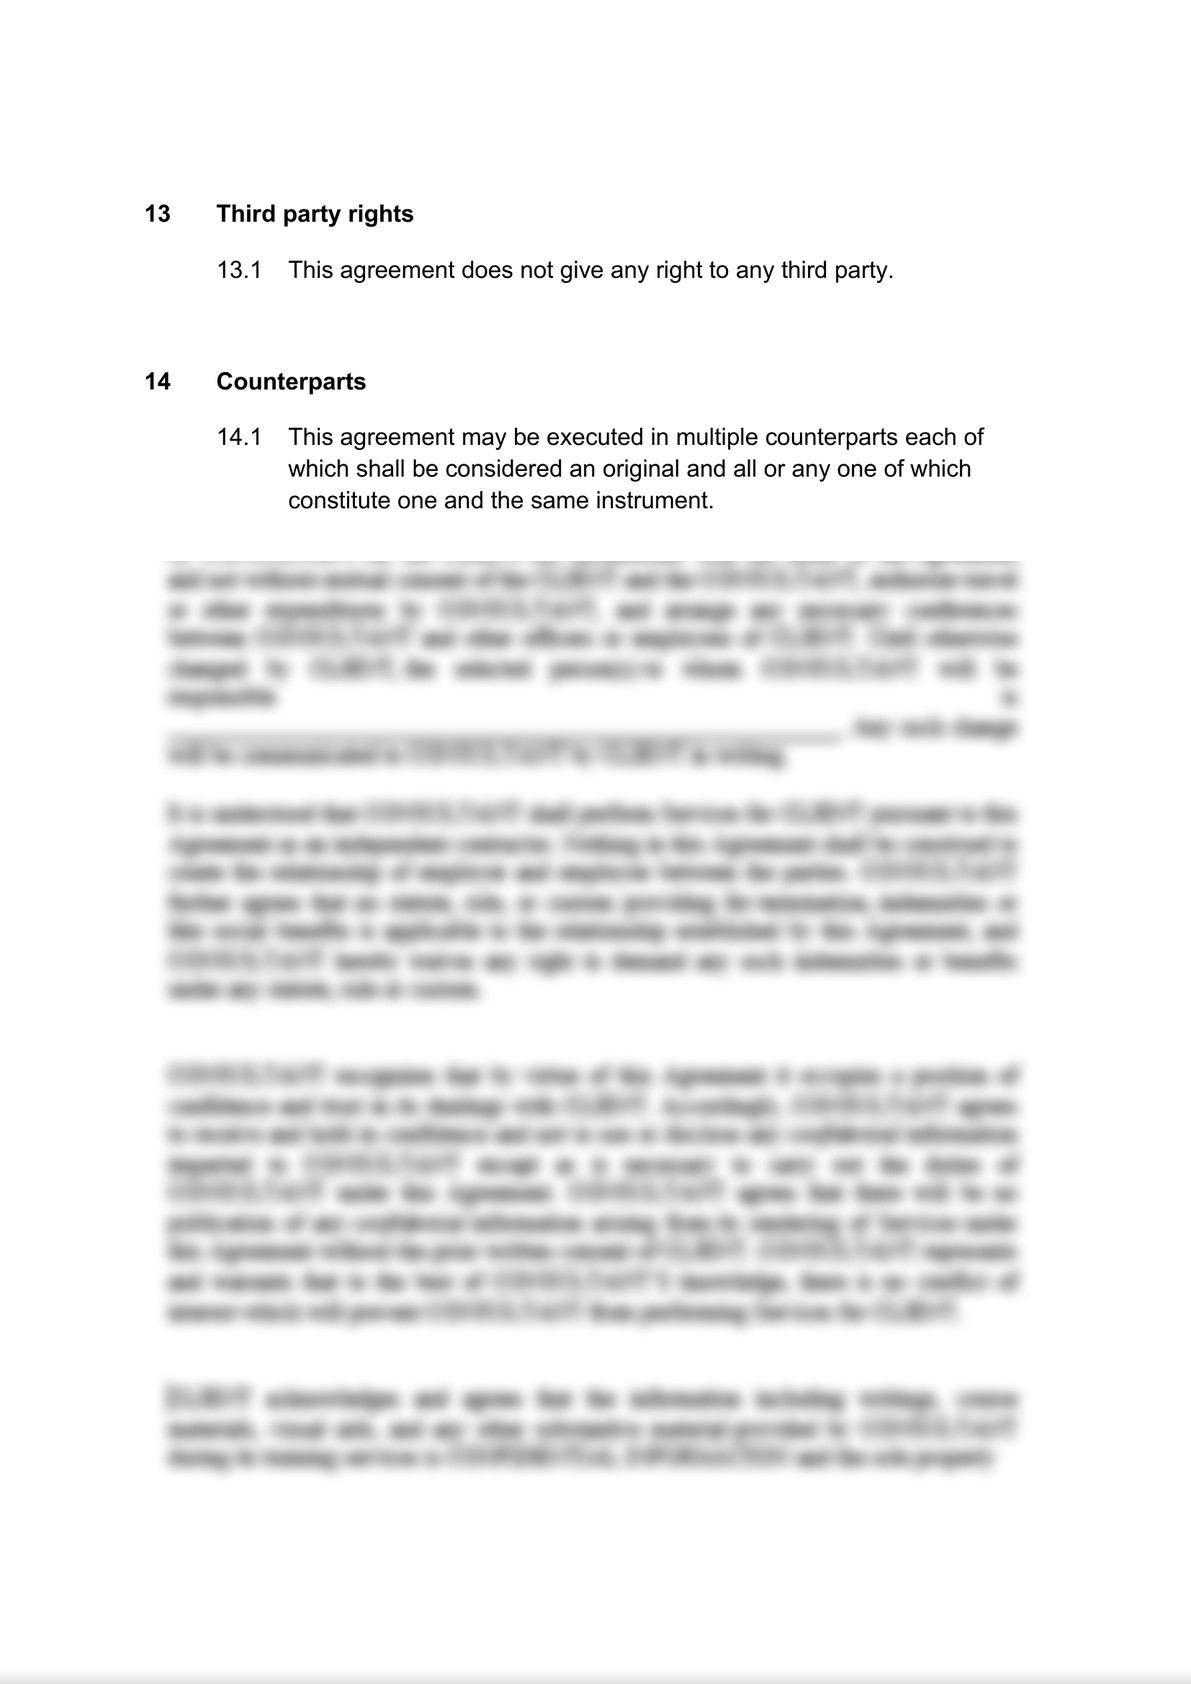 Employment agency agreement: client's version-5